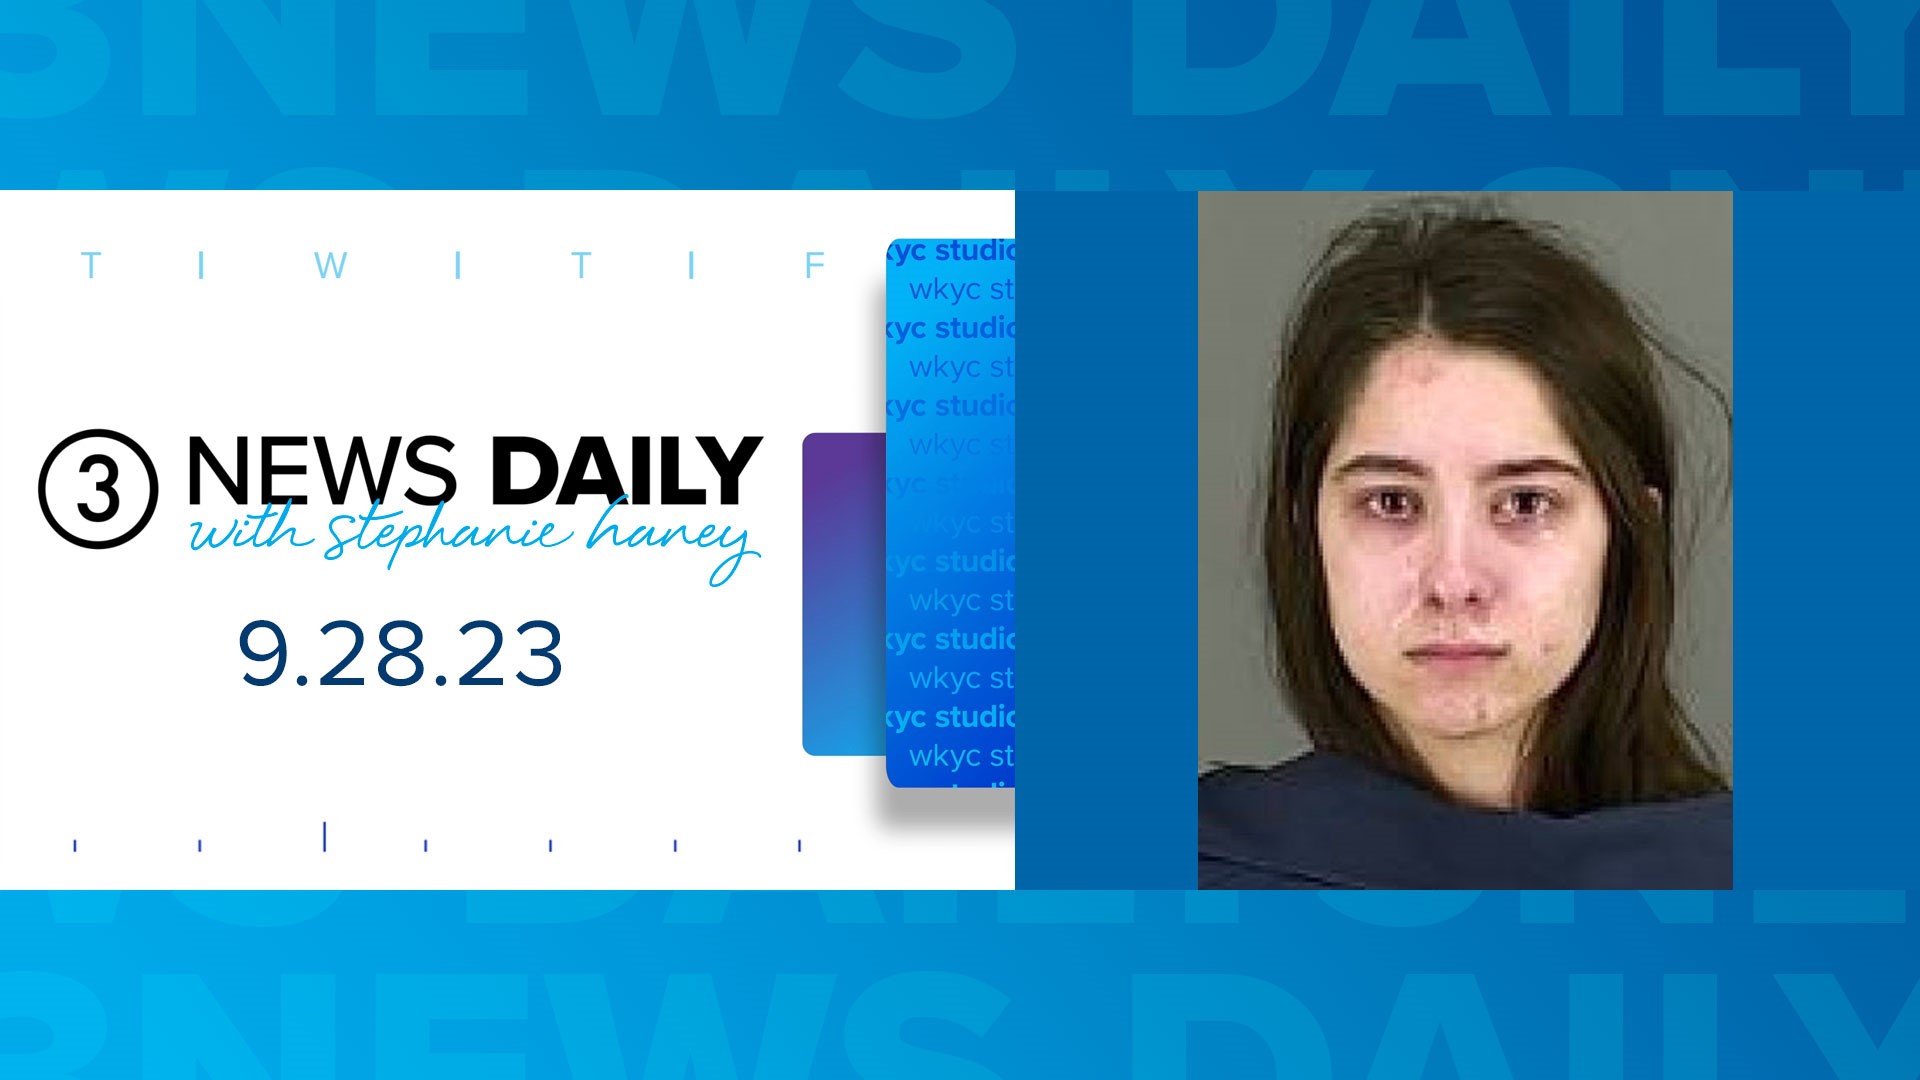 Akron woman who brutally killed mom with iron skillet and knife sentenced to prison despite mental illness claim, and more on 3News Daily with Stephanie Haney